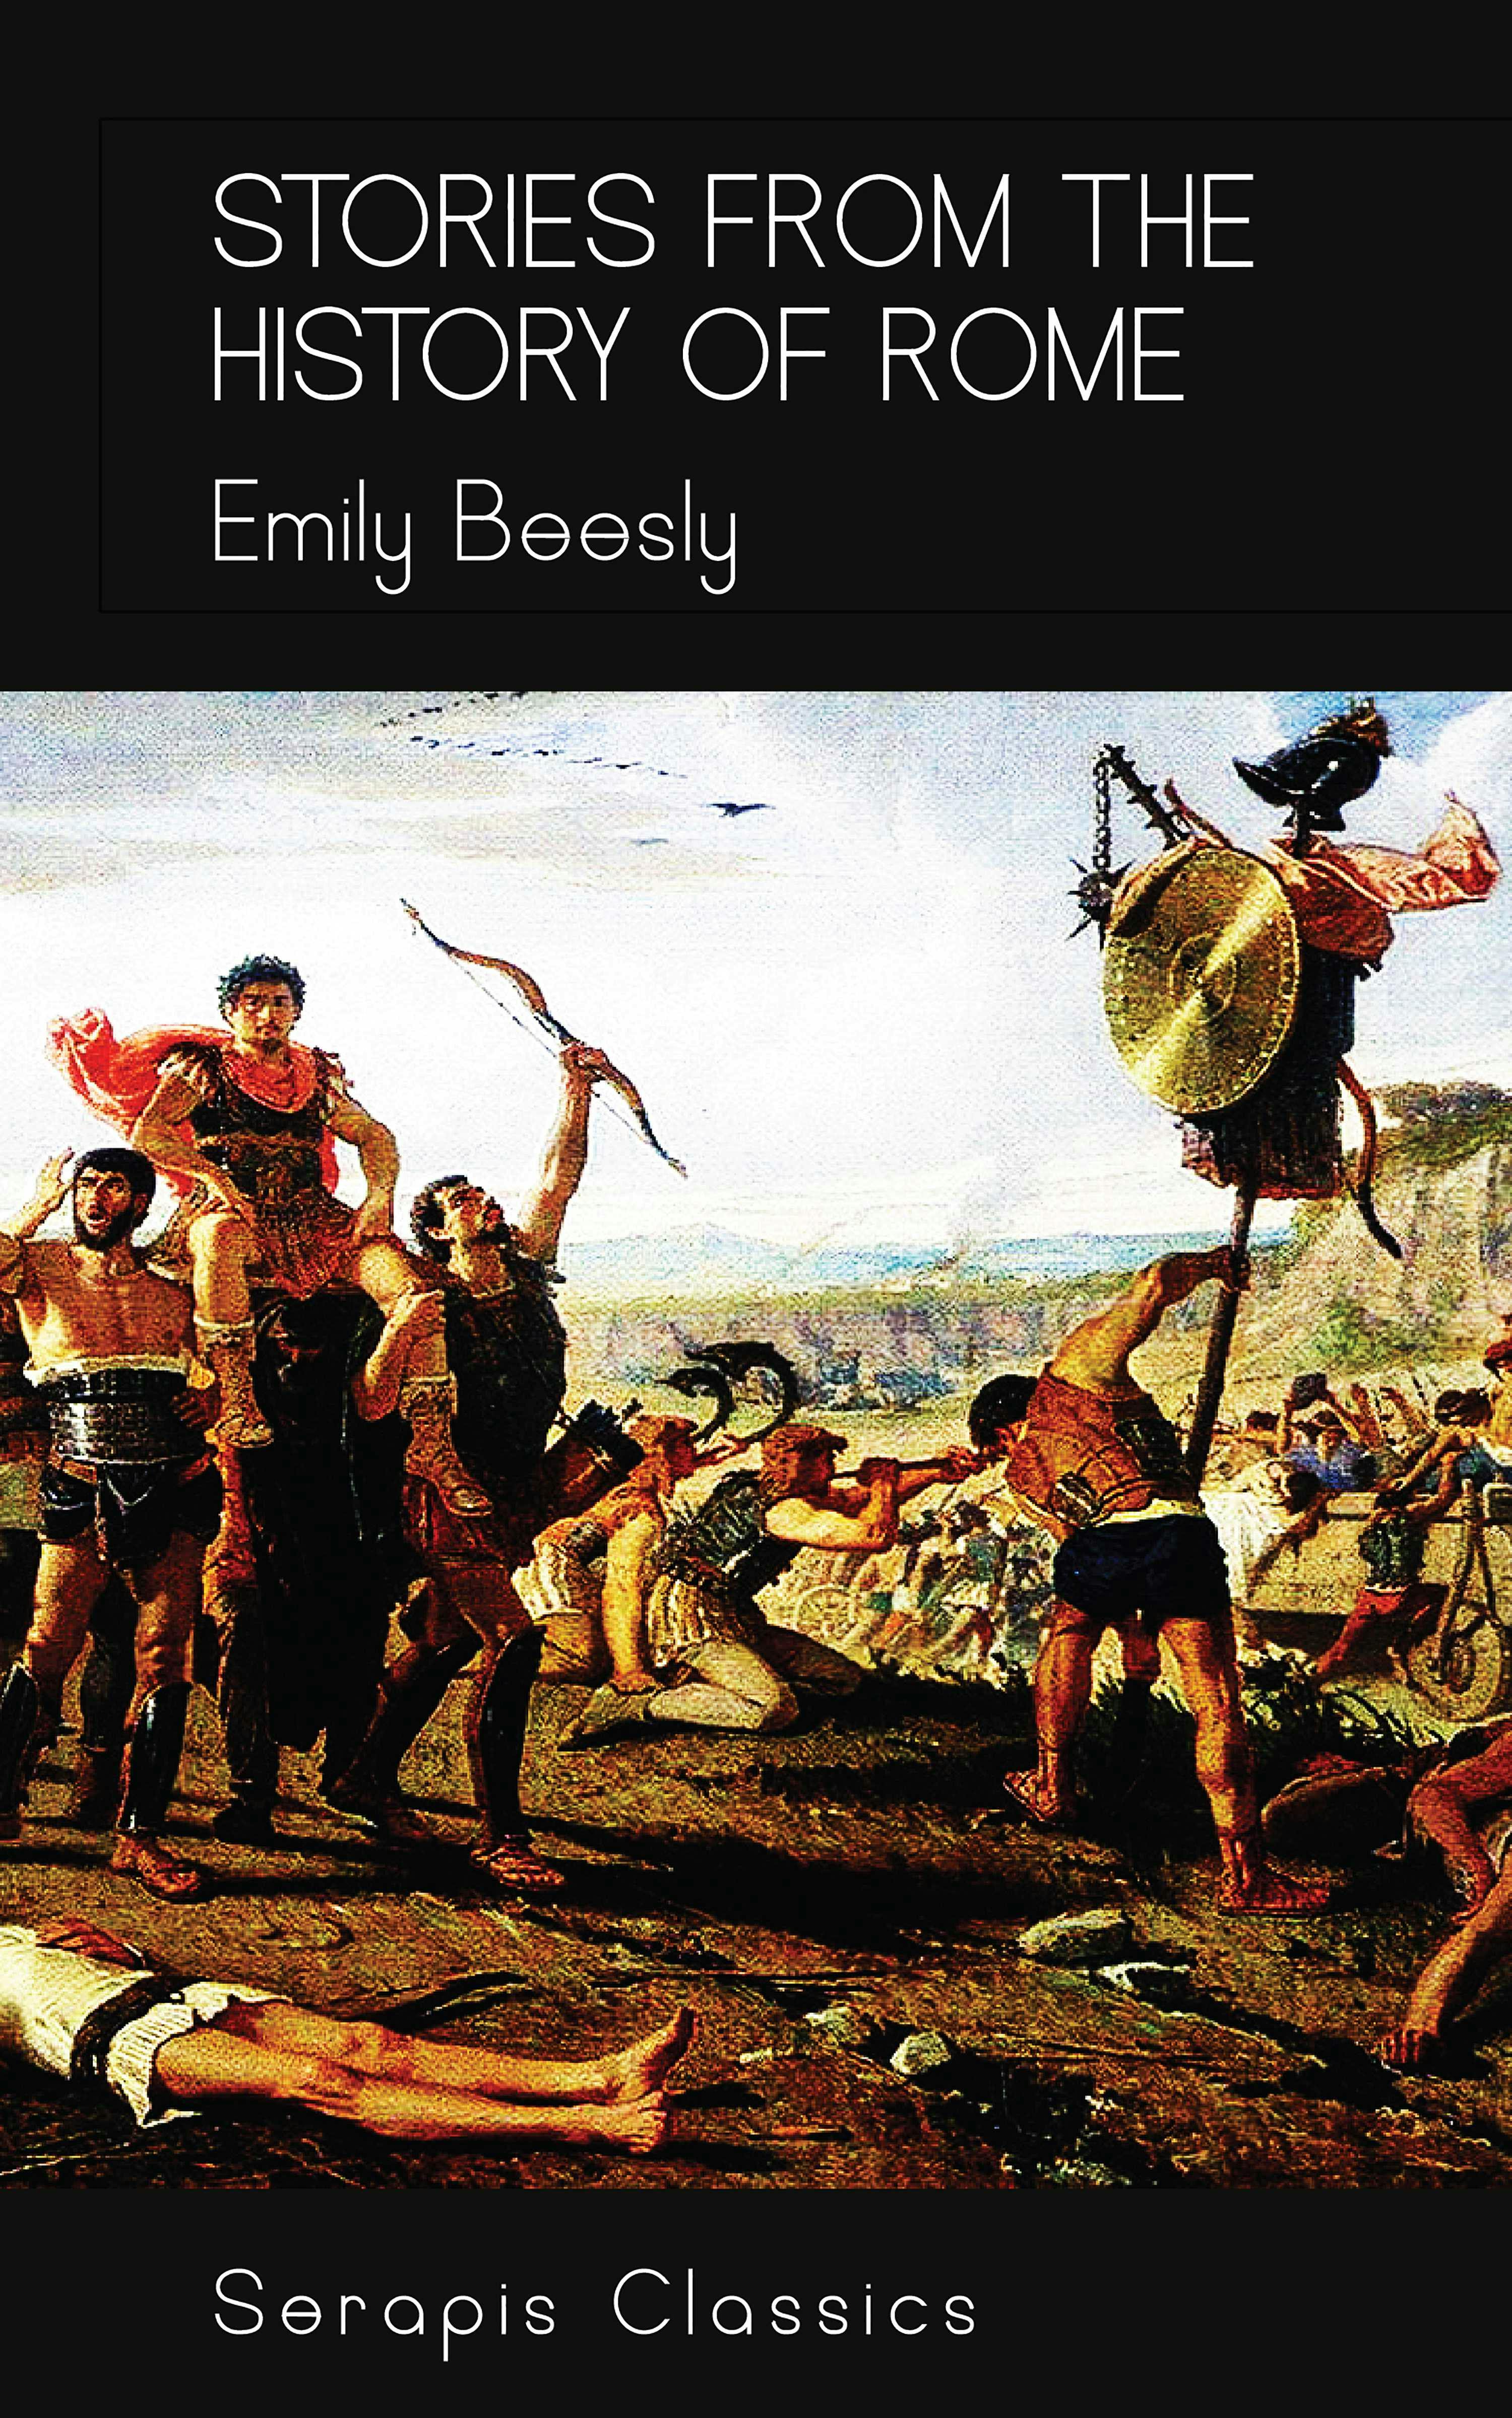 Stories from the History of Rome (Serapis Classics) - Emily Beesly